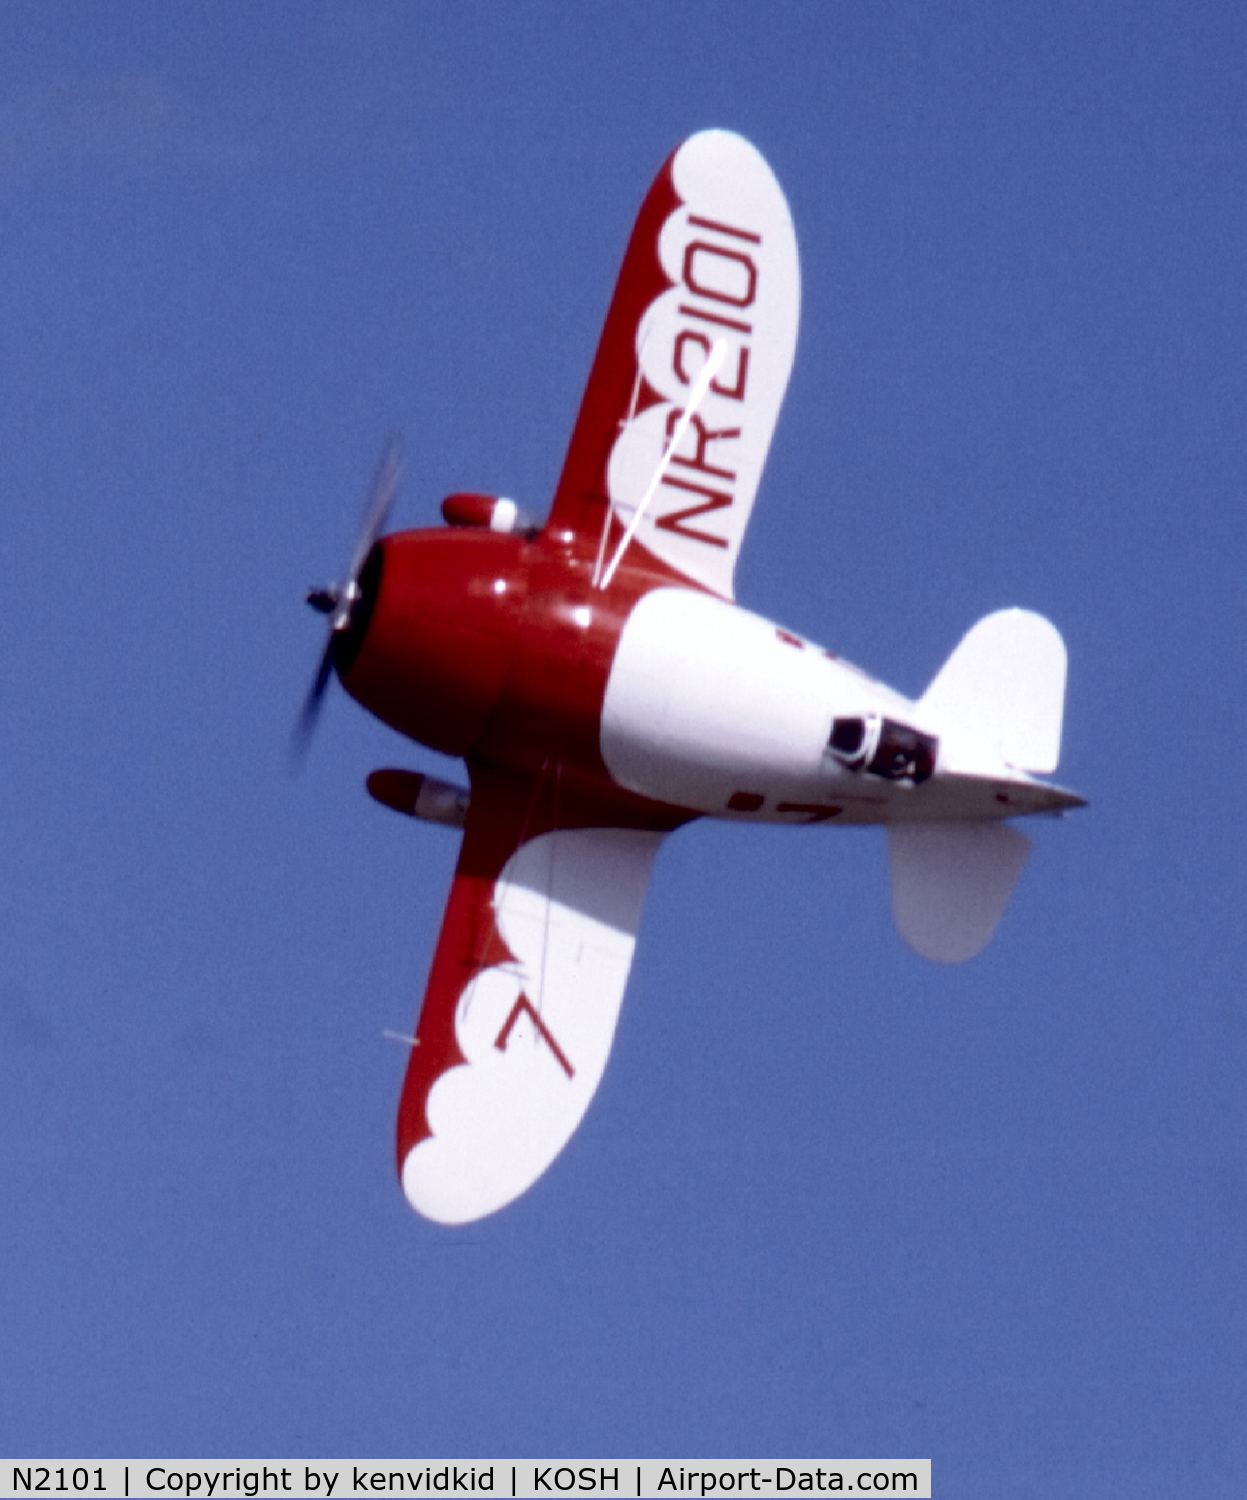 N2101, 1933 Granville Brothers Gee Bee Sportster E C/N R-2, At Air Adventure 1993 Oshkosh.